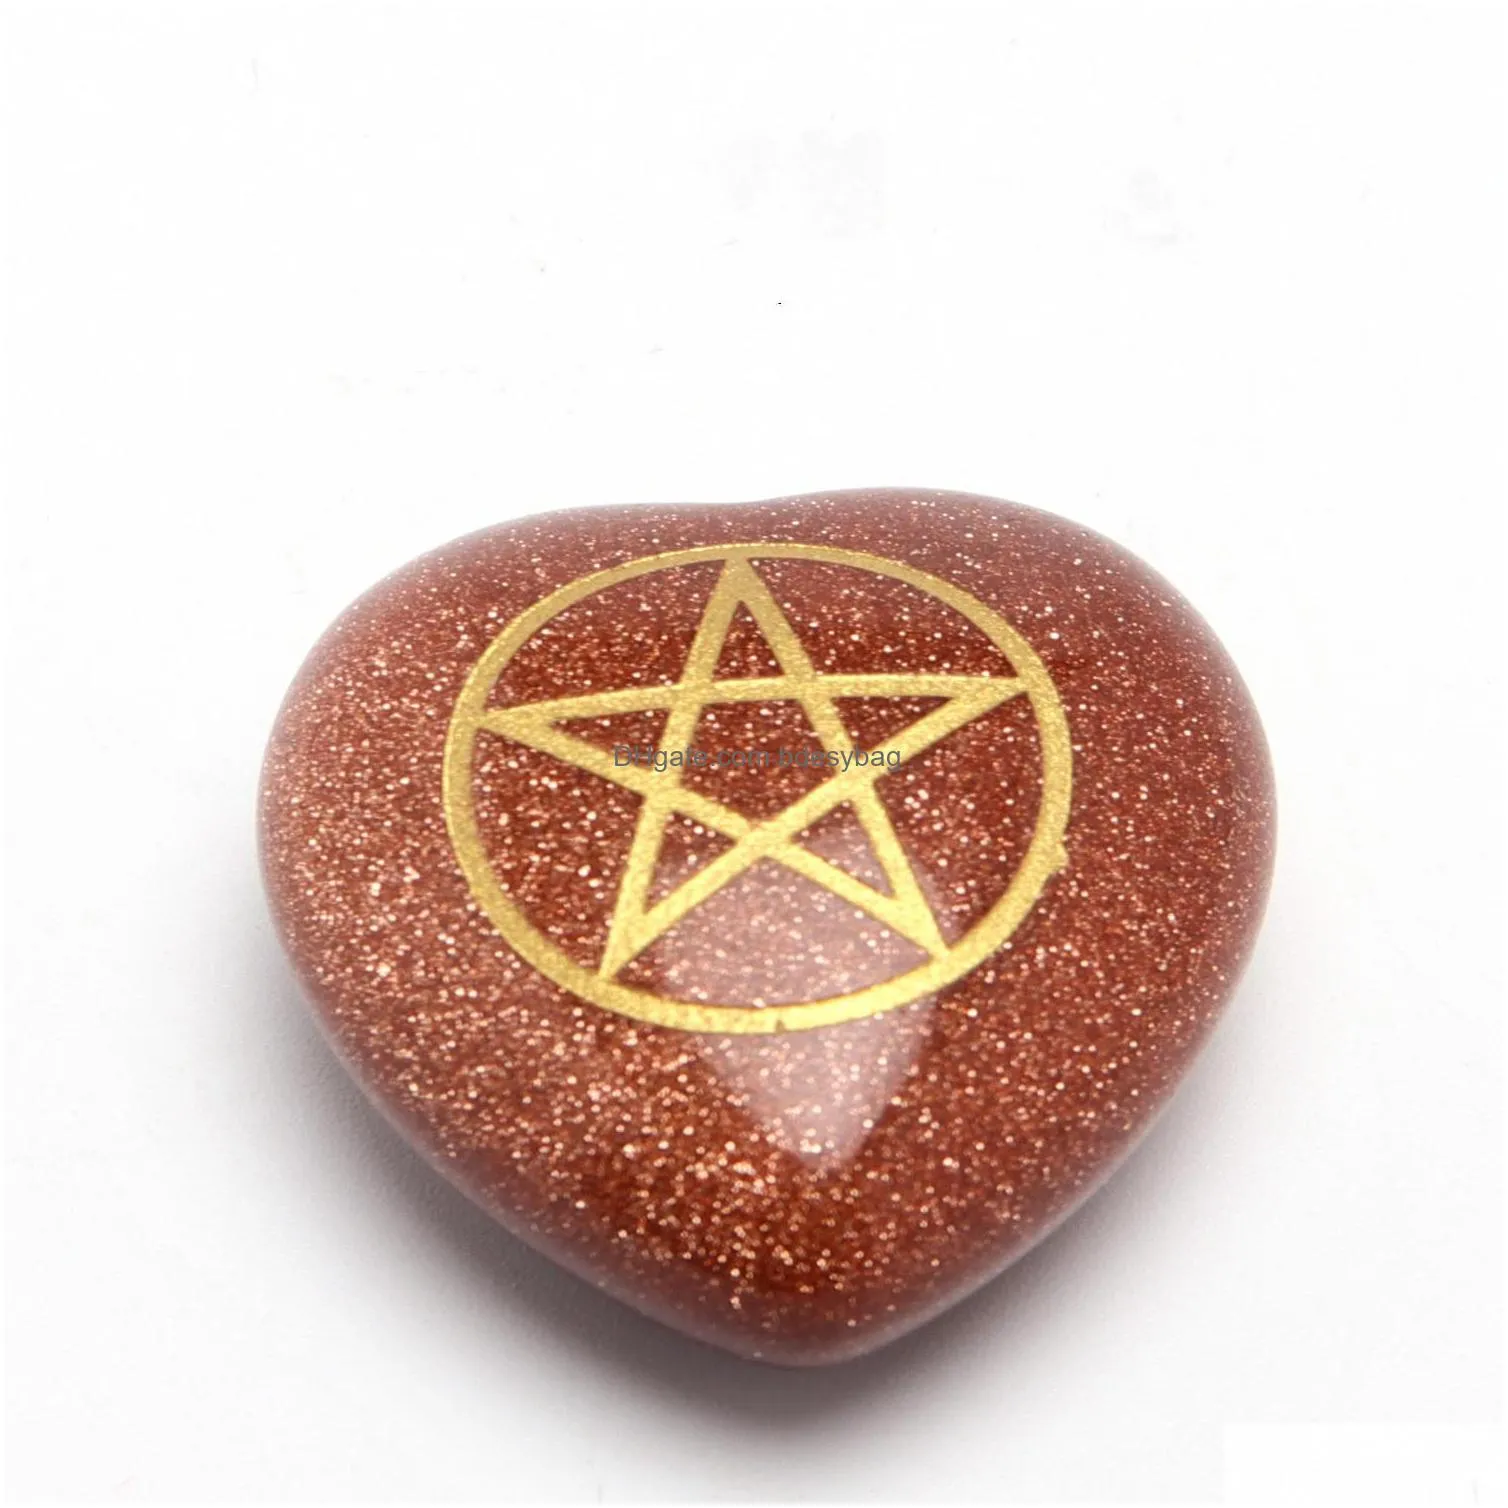 natural stone heart shape pendant with pentagram kore symbol of earth goddess in ancient egyptian culture for men and women